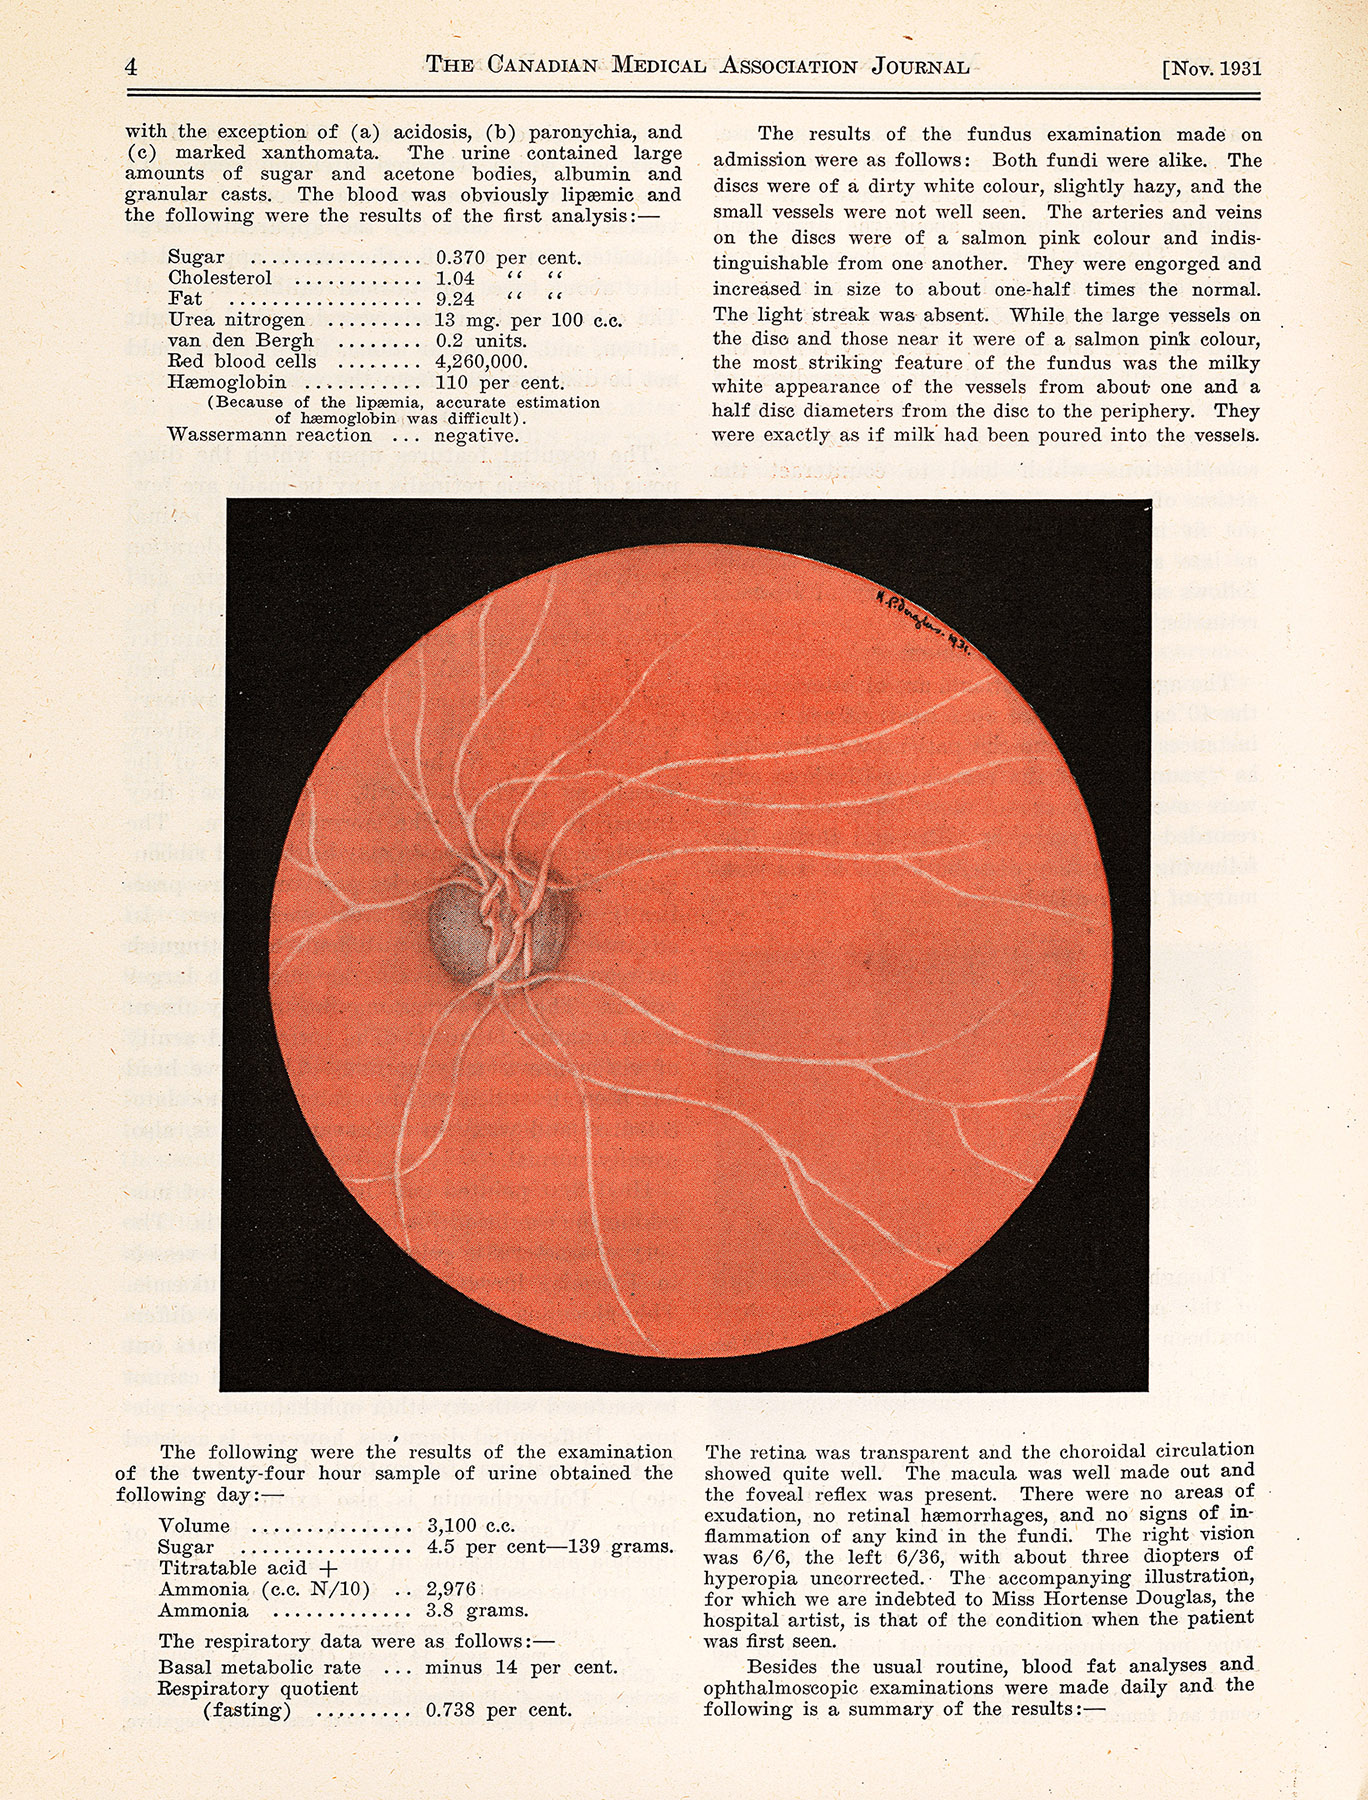 journal page with drawing of eye fundus